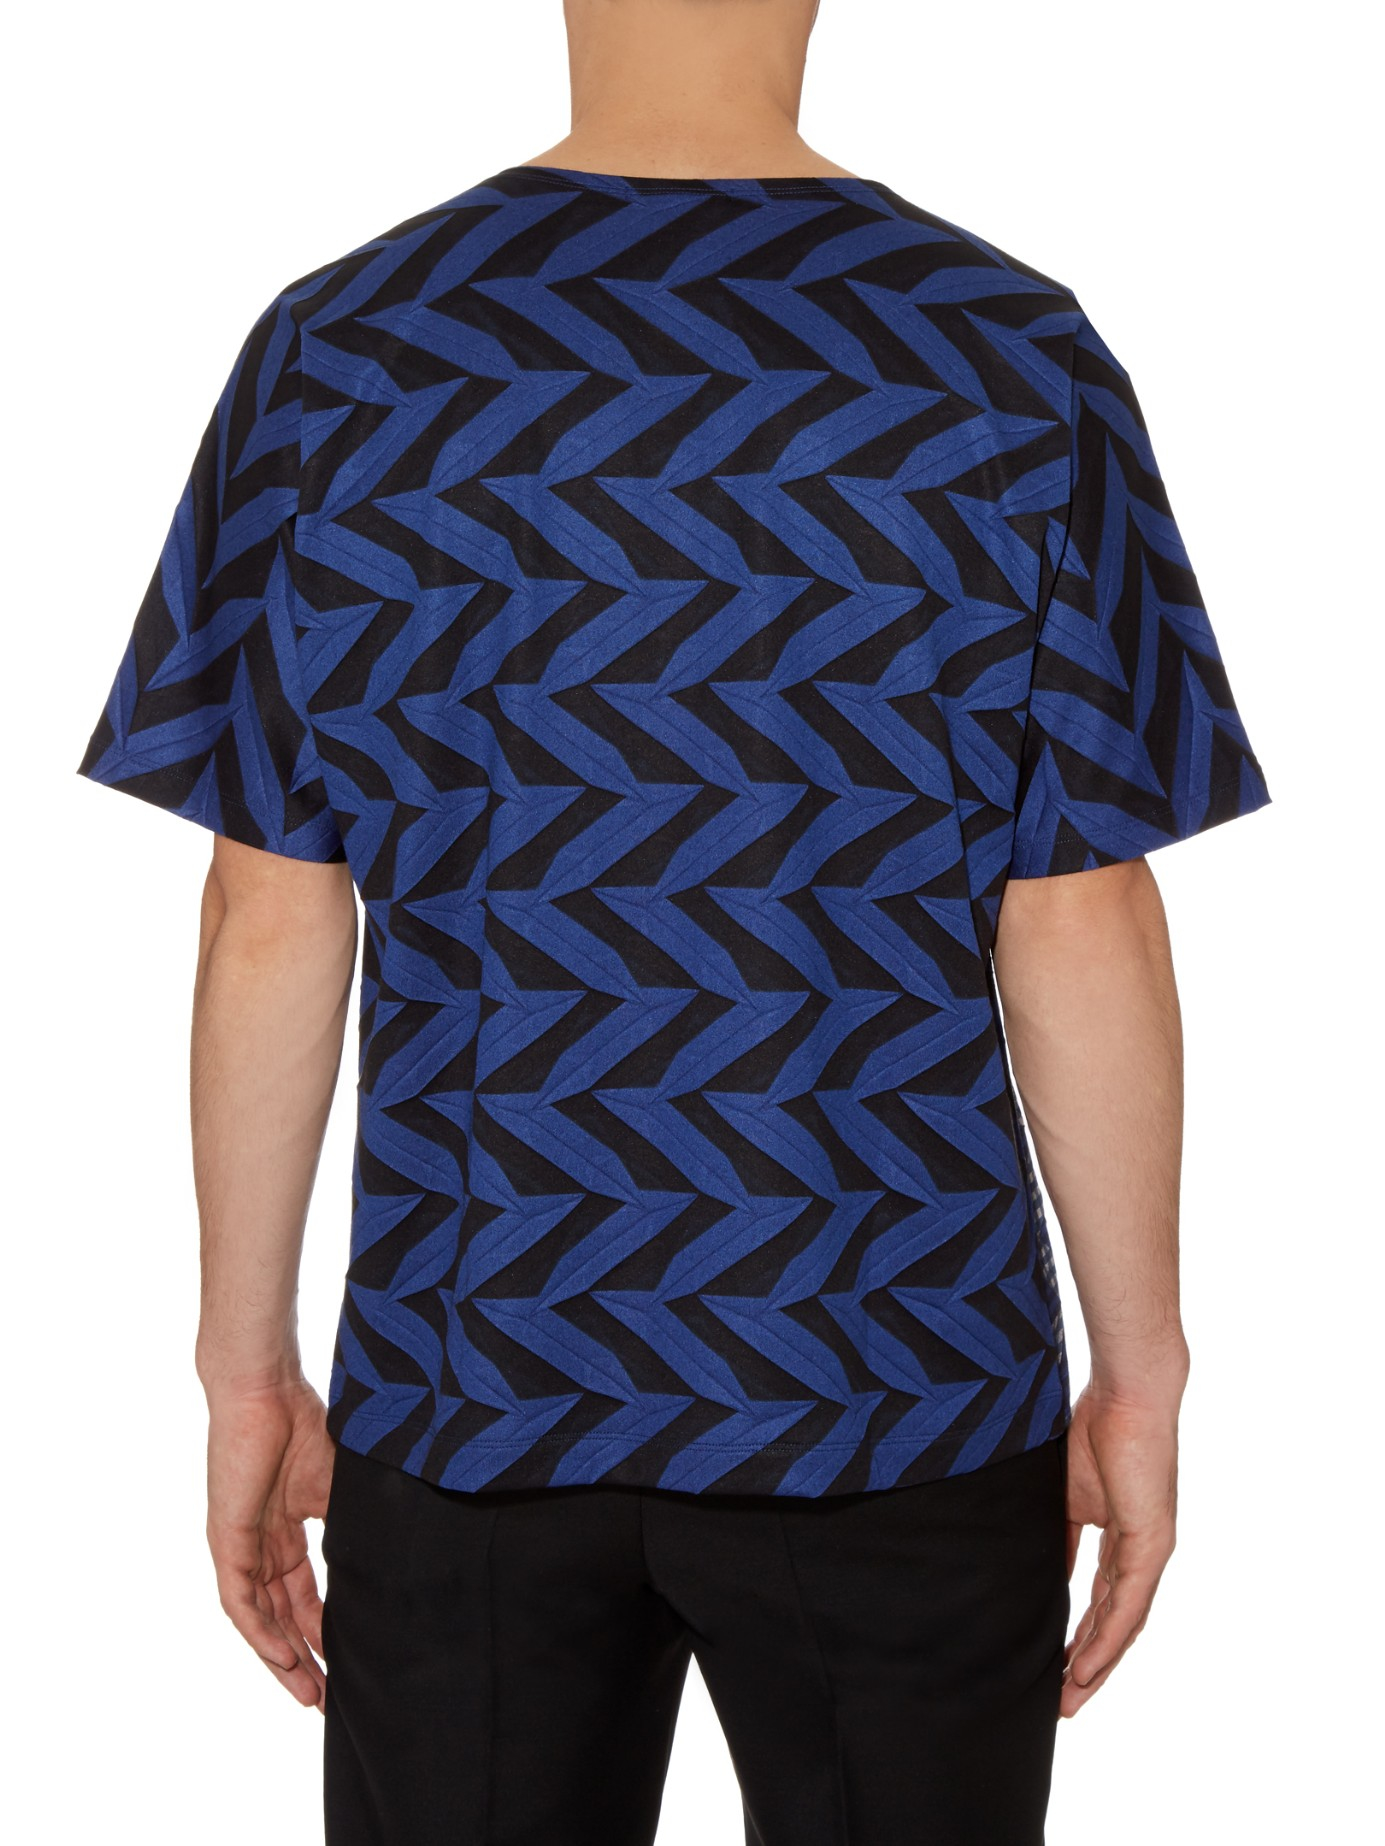 Issey Miyake Geometric Zigzag-print T-shirt in Blue for Men - Lyst